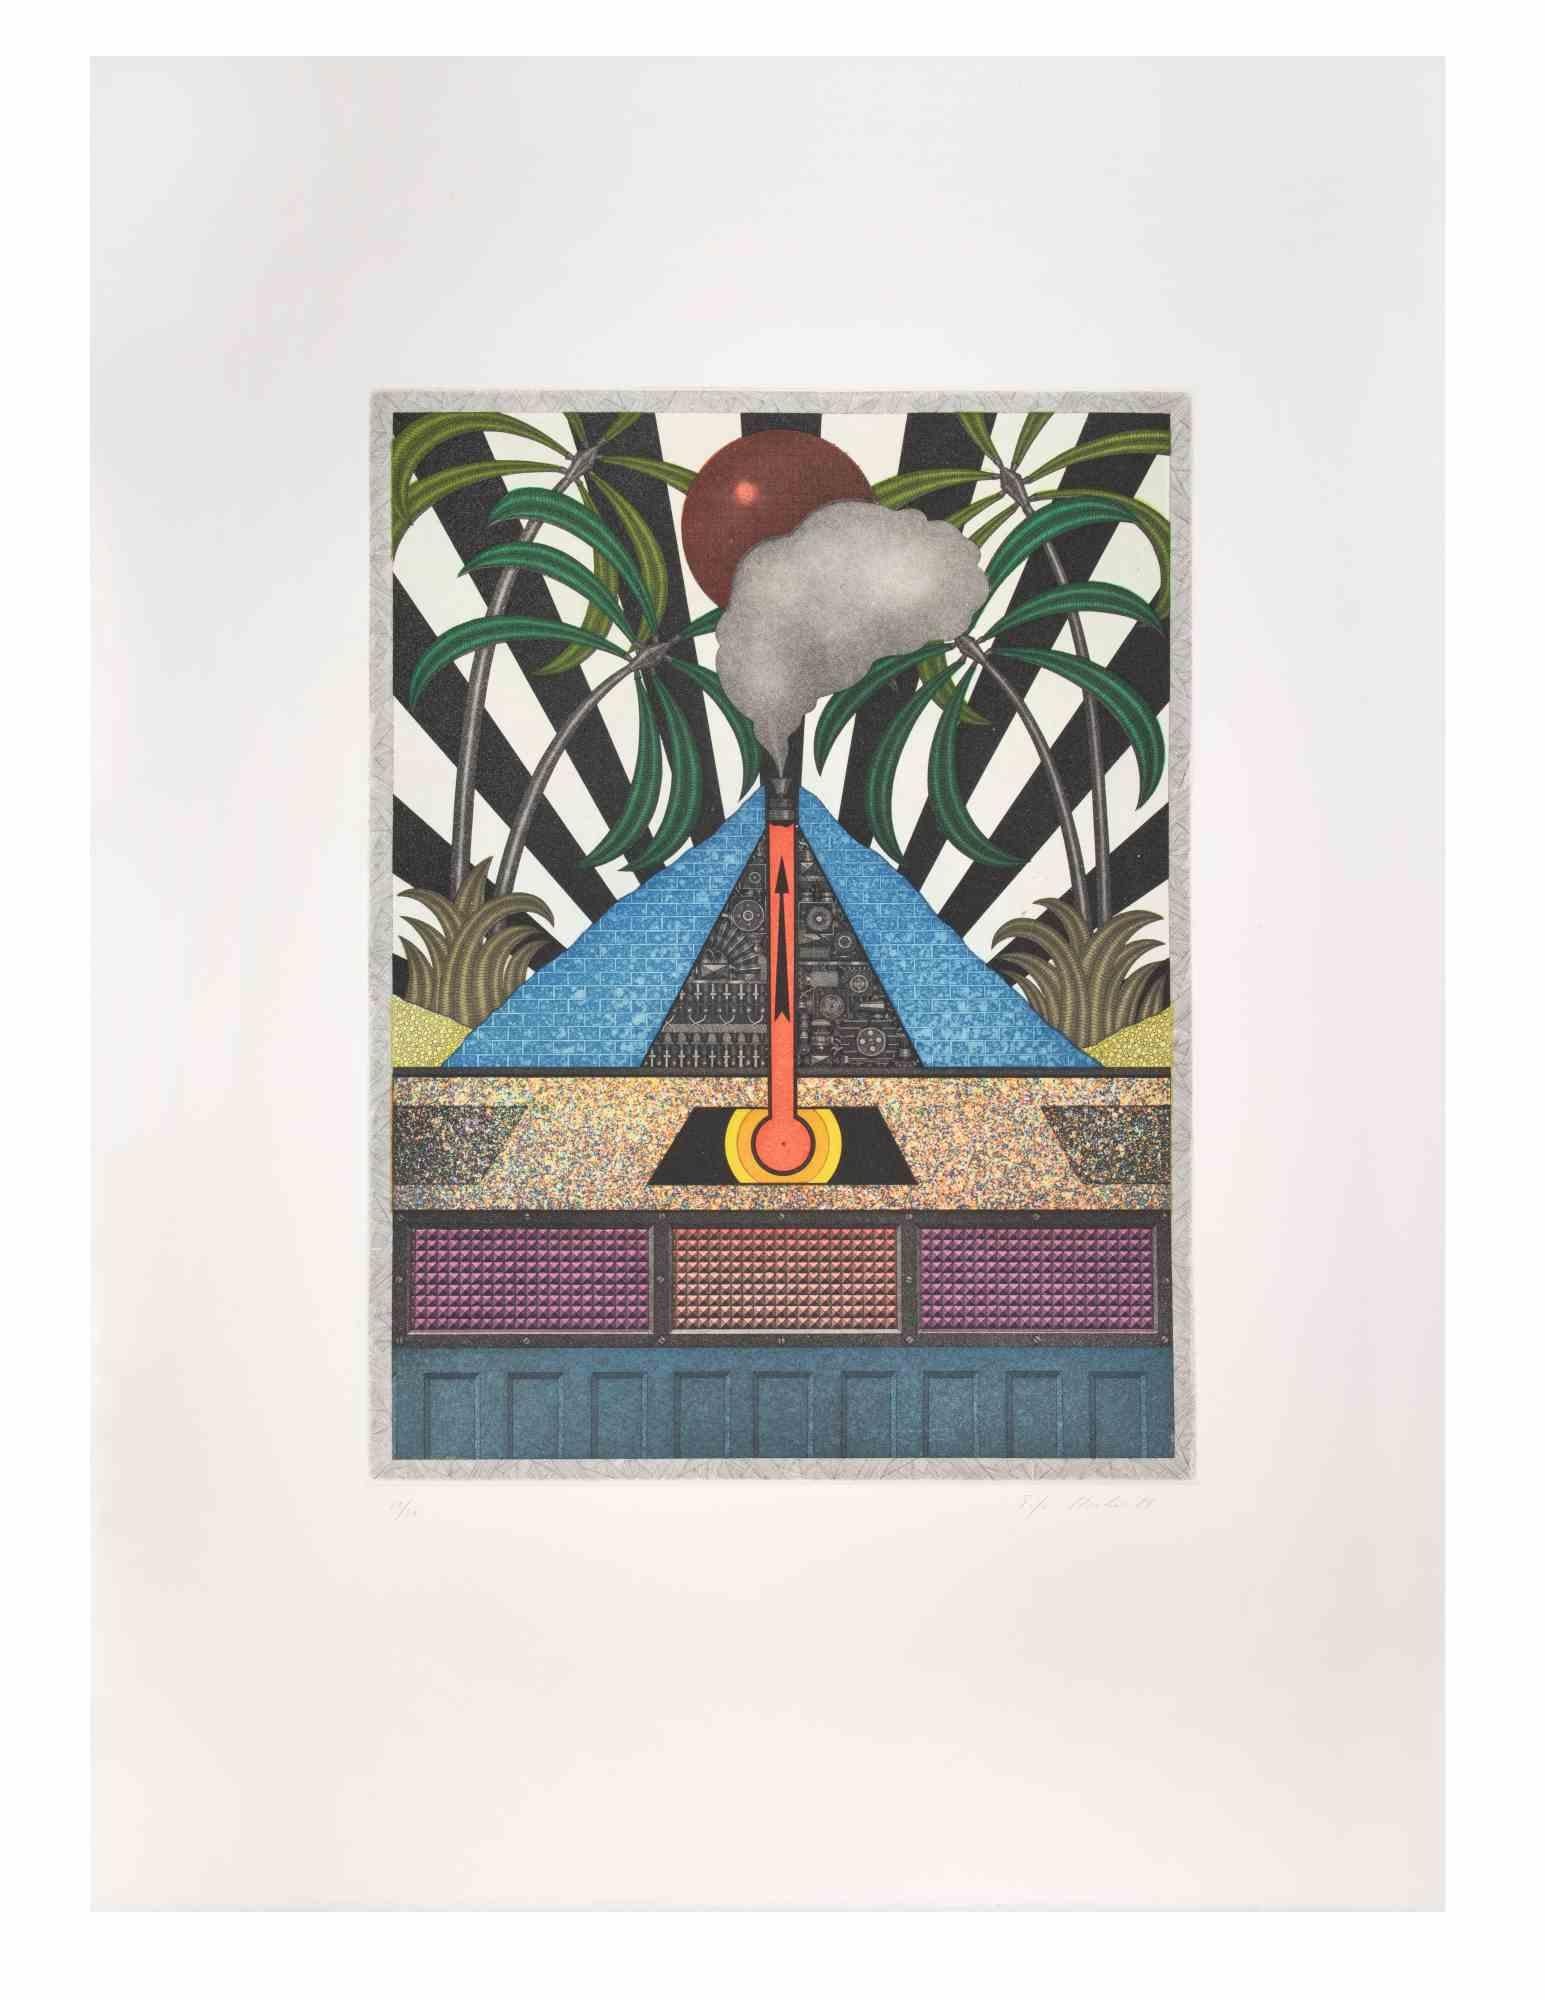 Blue Volcan is a contemporary artwork realized by the artist Fifo Stricker in 1984.

Mixed colored aquatint and etching. Original title: Der Blaue Vulcan

Hand signed and dated by the artist on the lower right margin.

Numbered on the lower left